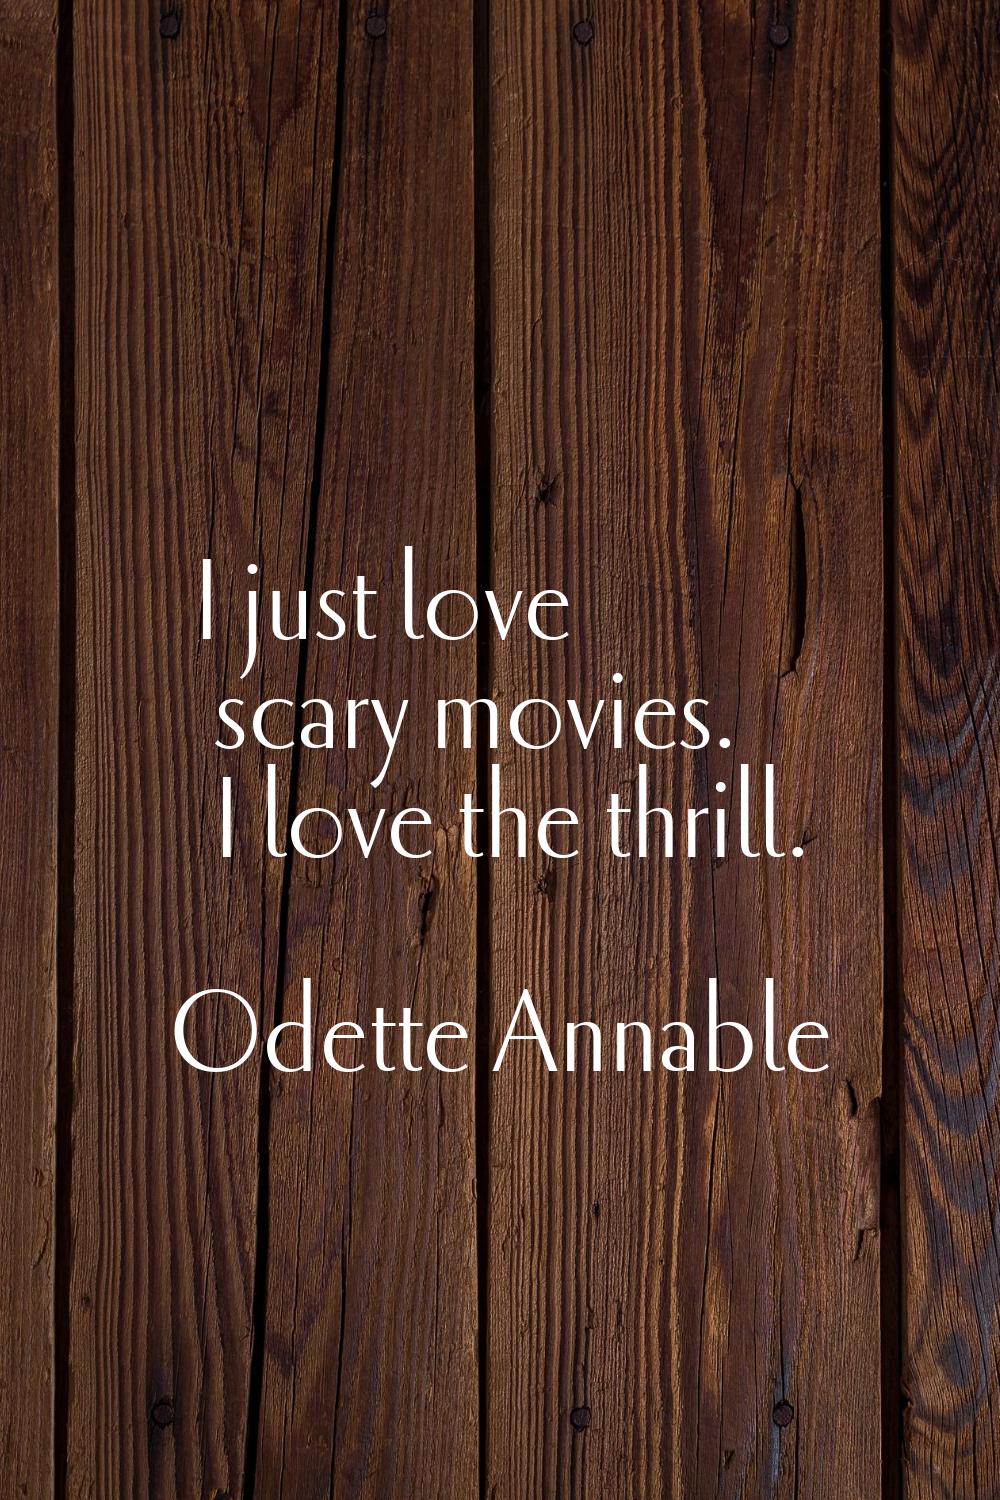 I just love scary movies. I love the thrill.